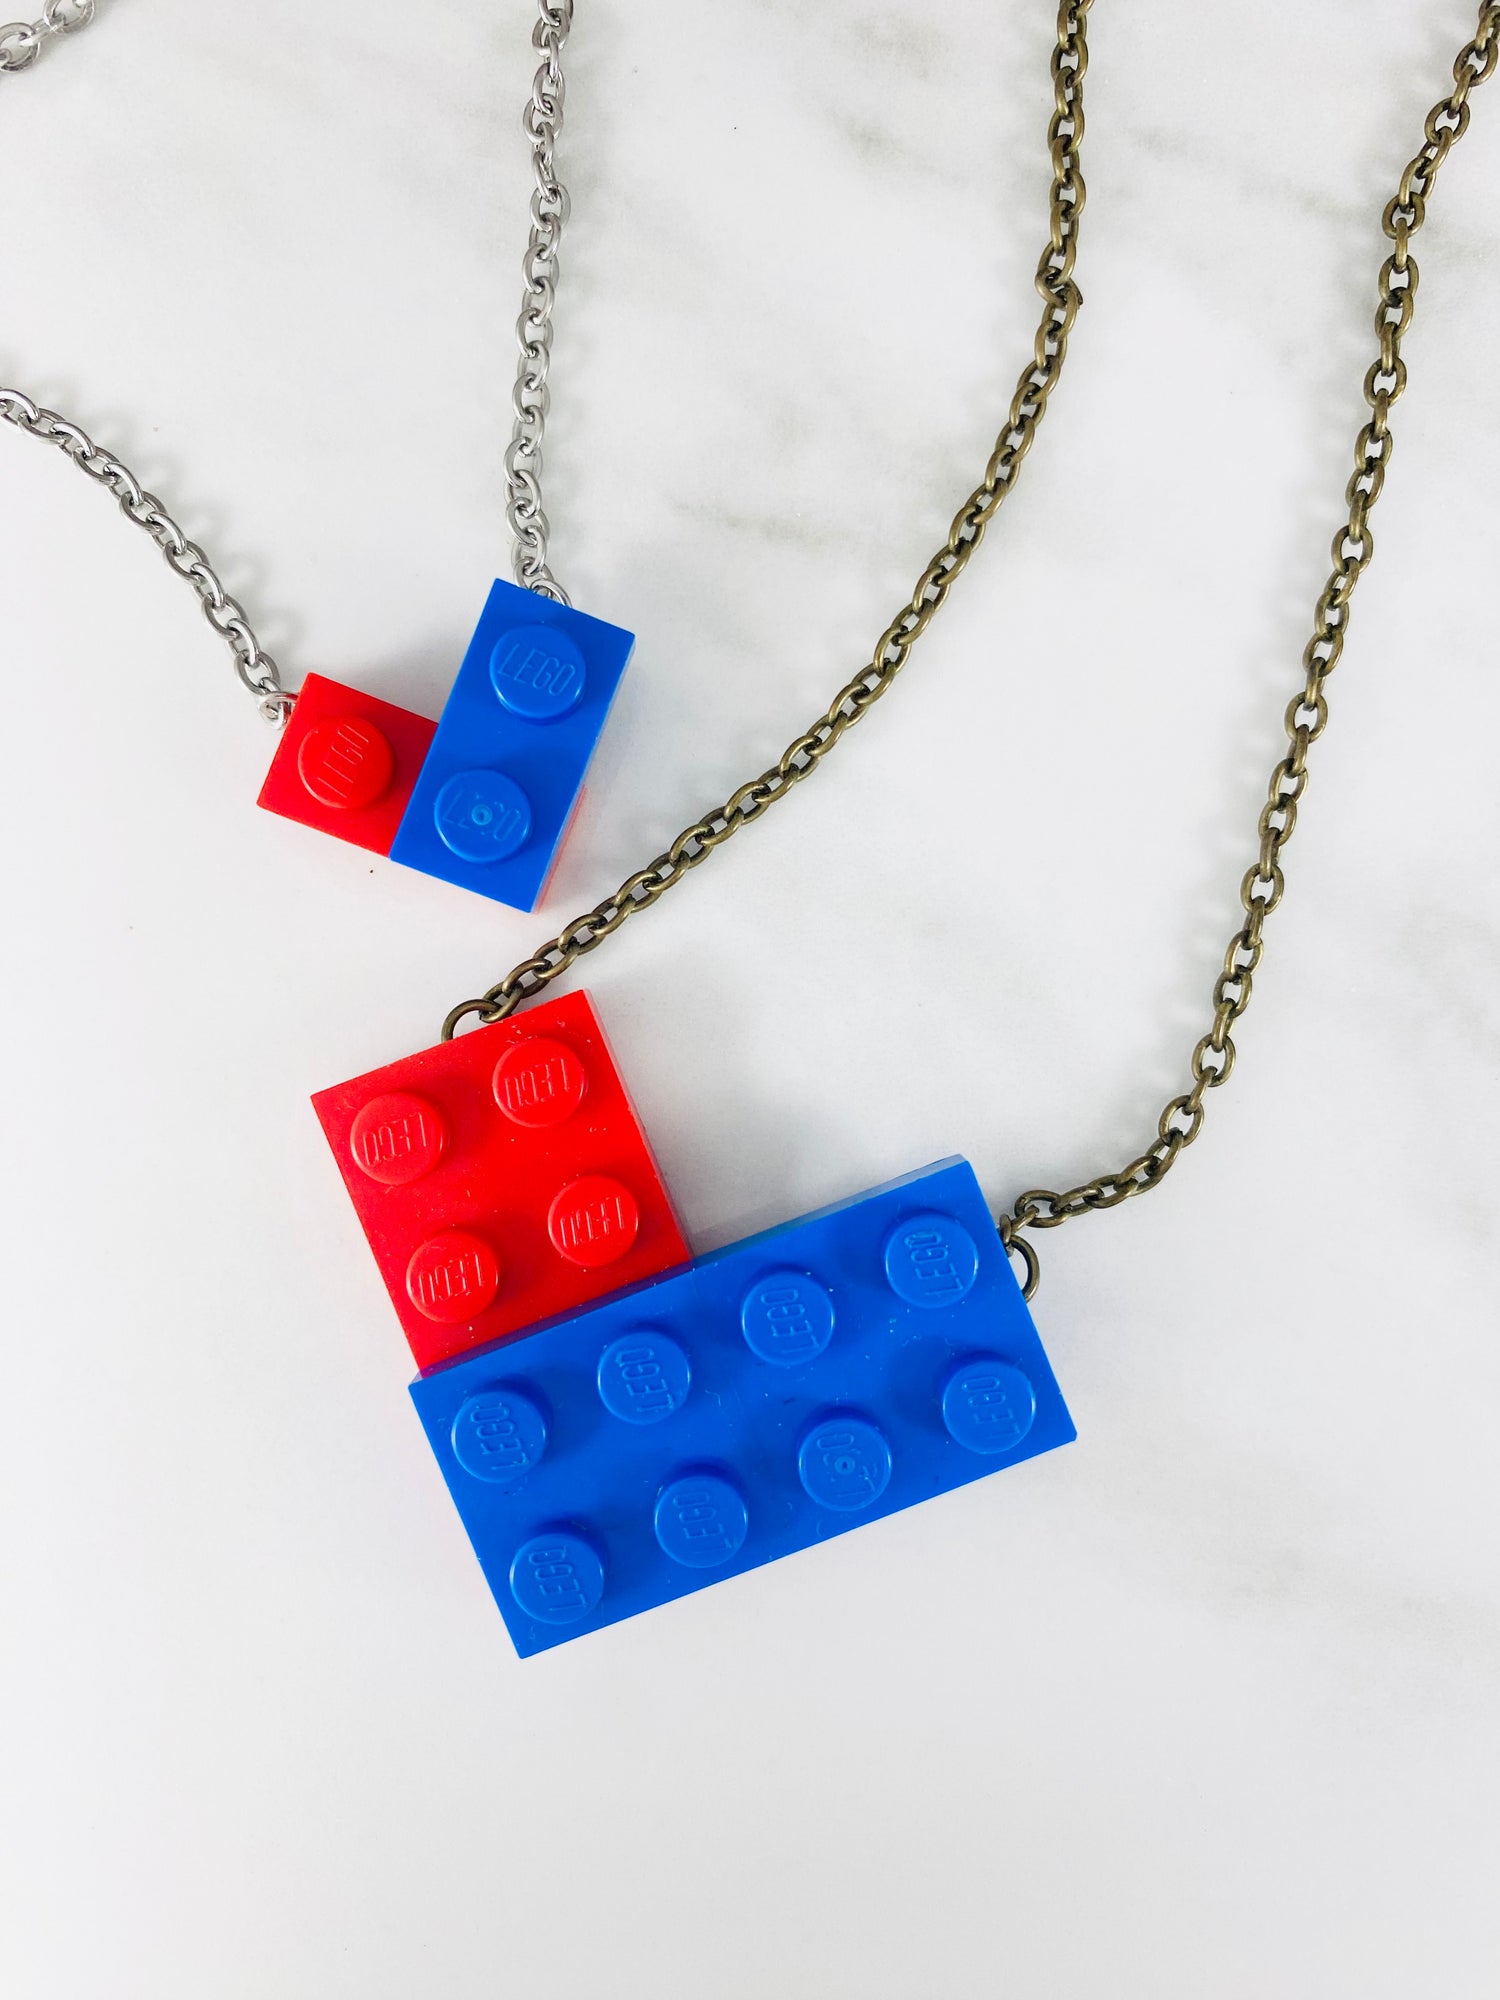 Two blue and red Tu Snaps necklaces made from Lego pieces, one in the shape of a large heart and one in the shape of a small heart